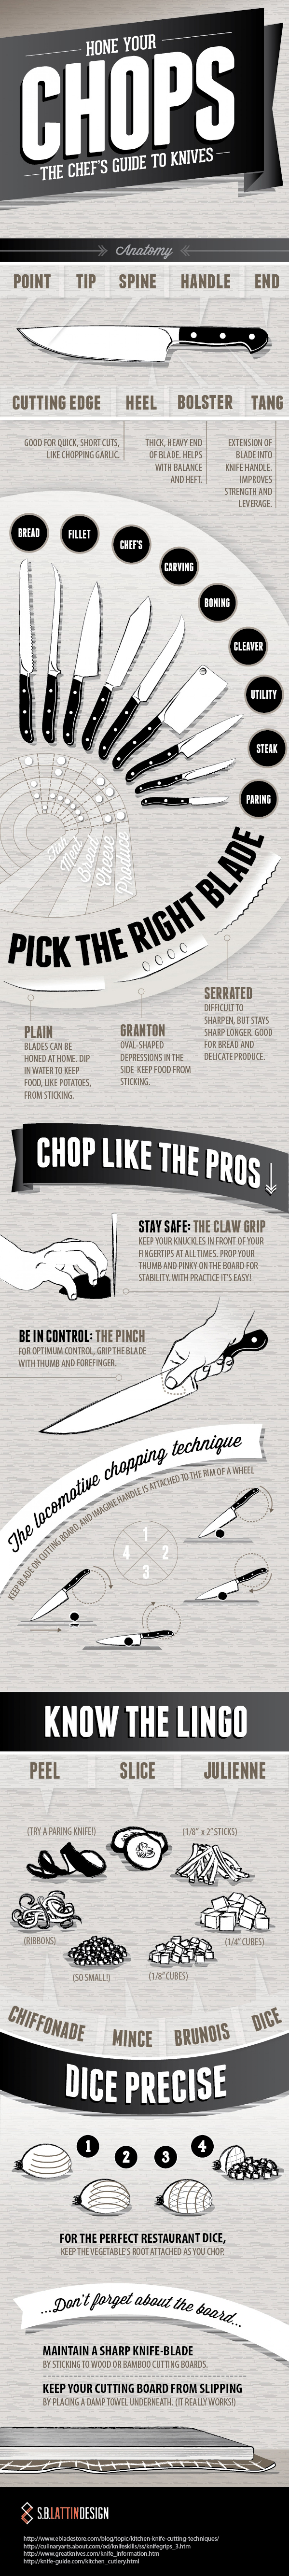 The Chef's Guide To Knives